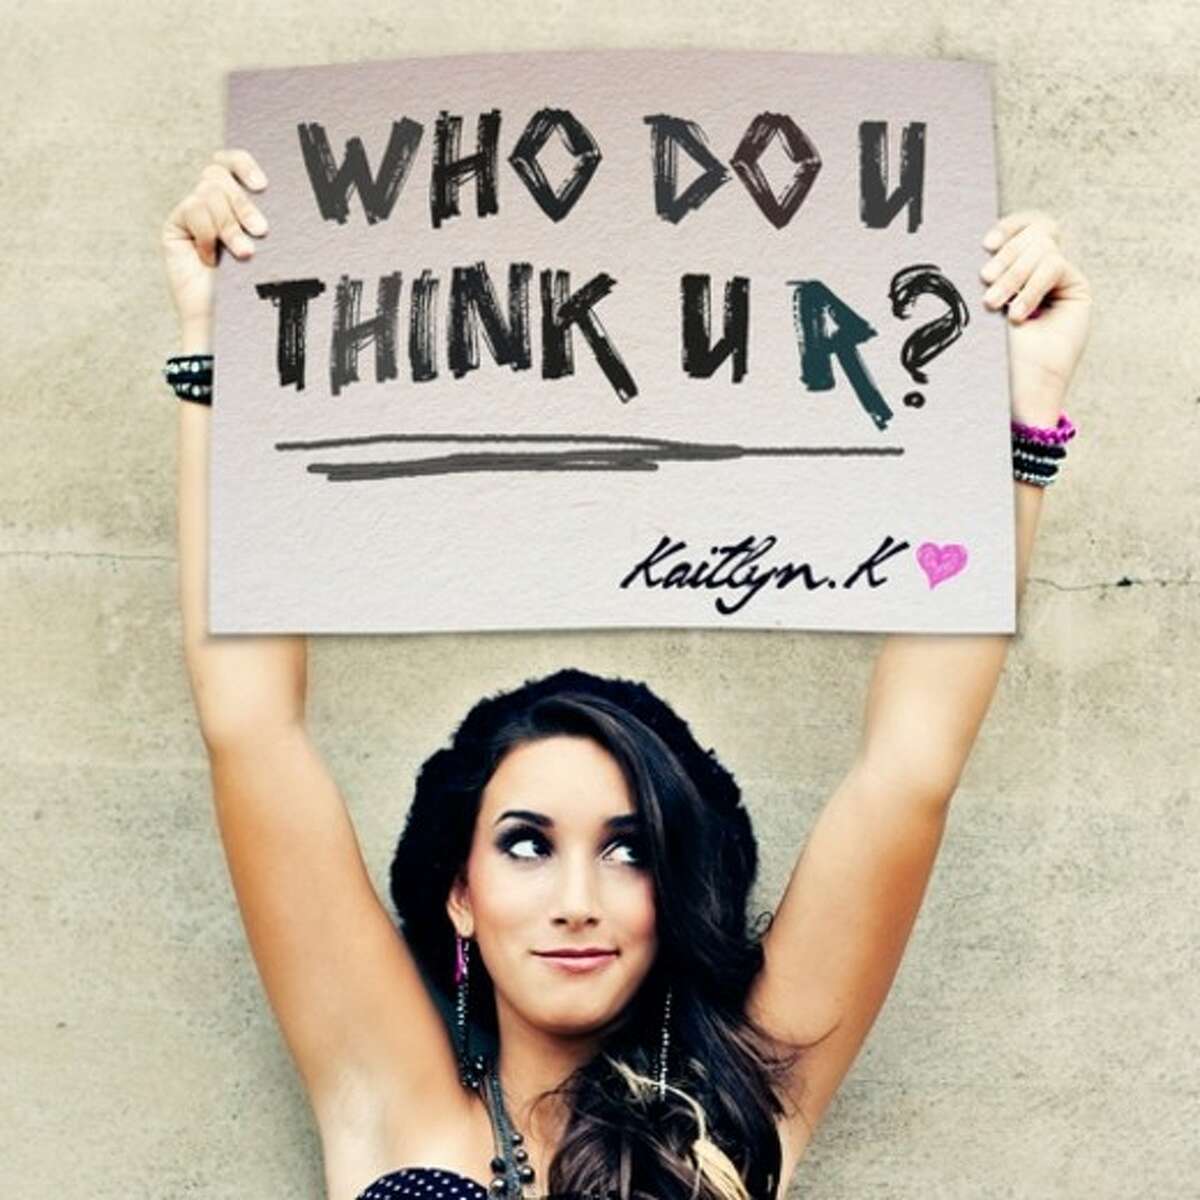 Kaitlyn Knippers, aka Kaitlyn K, in a promotional picture for her single “Who Do U Think U R?“